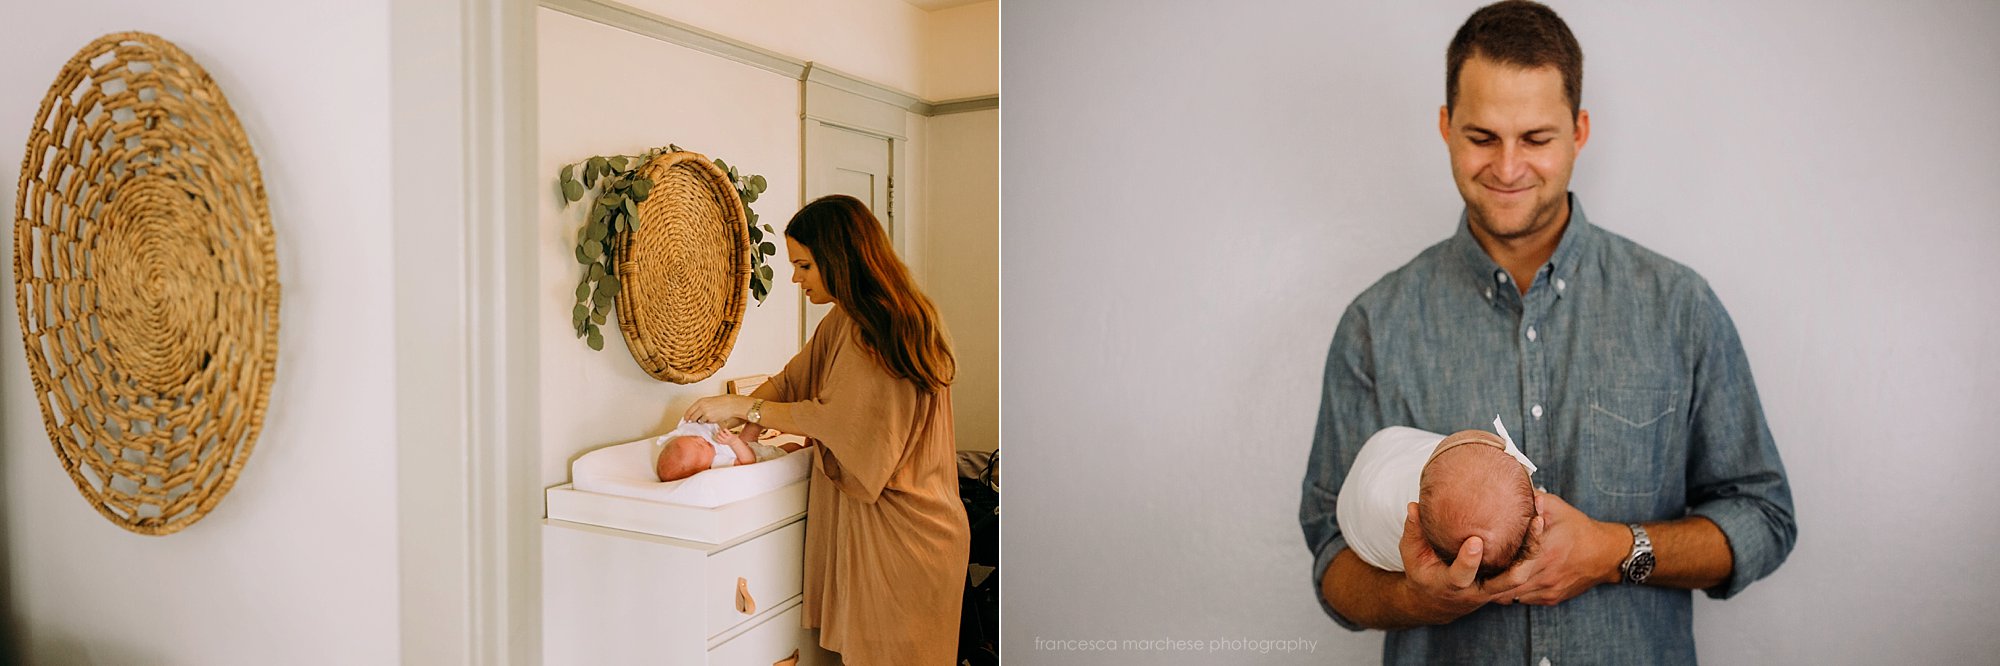 Francesca Marchese Photography first time new parents with their newborn baby lifestyle